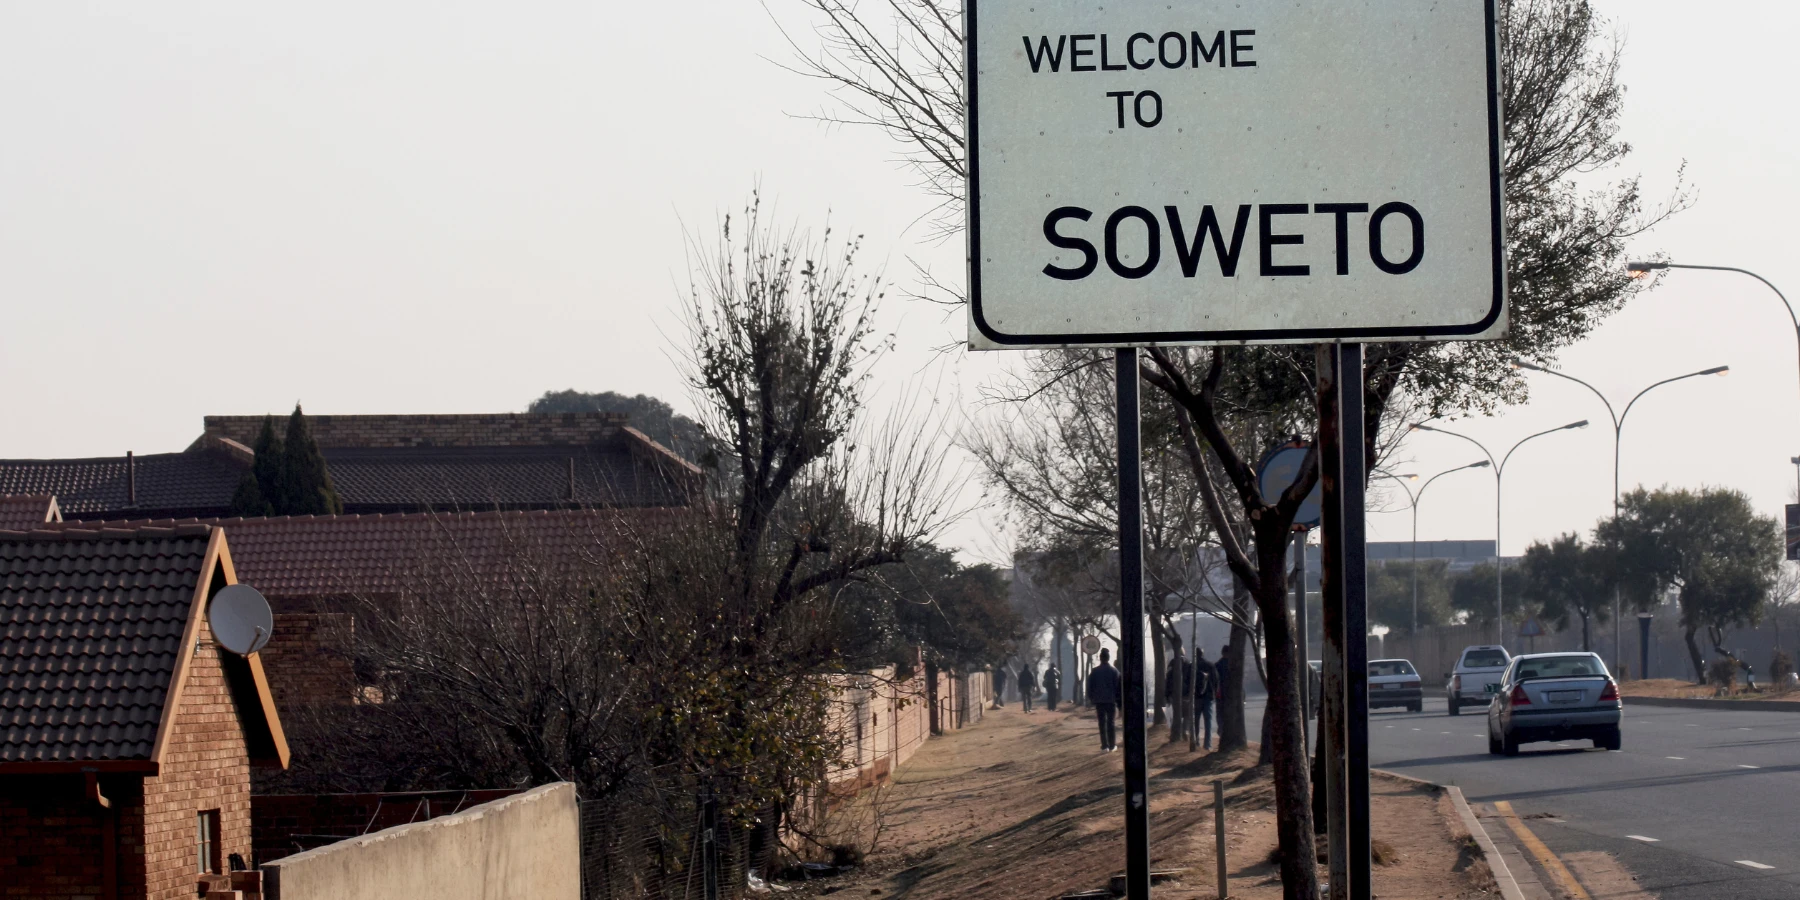 Soweto bicycle tour activities in Johannesburg